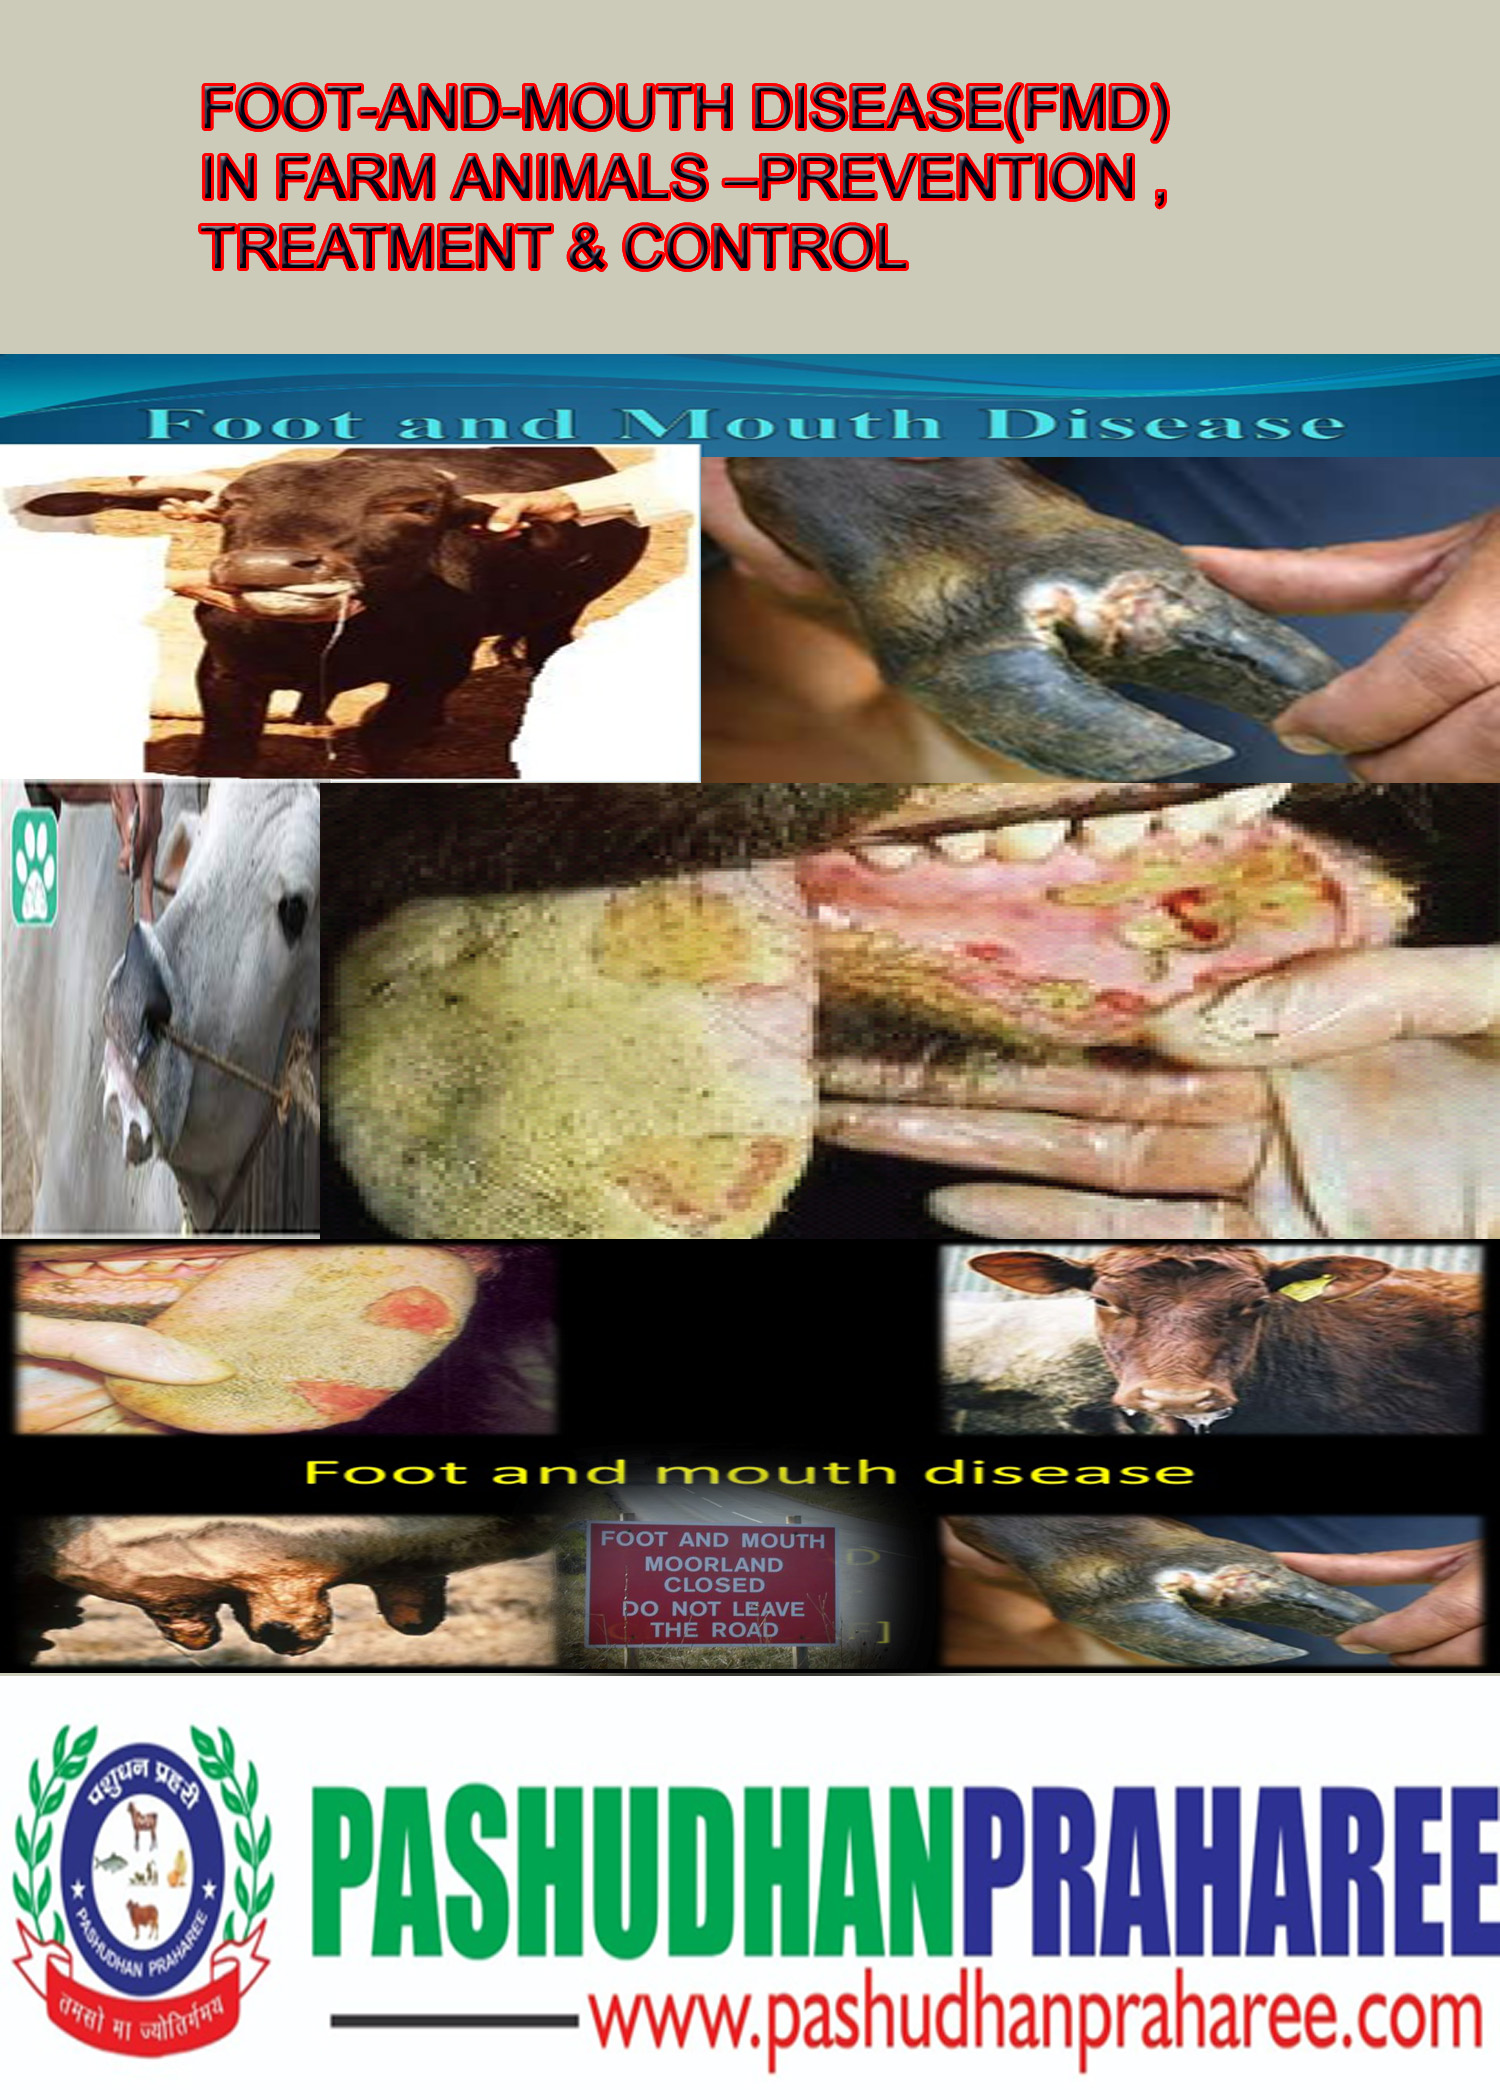 FOOT-AND-MOUTH DISEASE(FMD) IN FARM ANIMALS –PREVENTION ,TREATMENT &  CONTROL – Pashudhan praharee